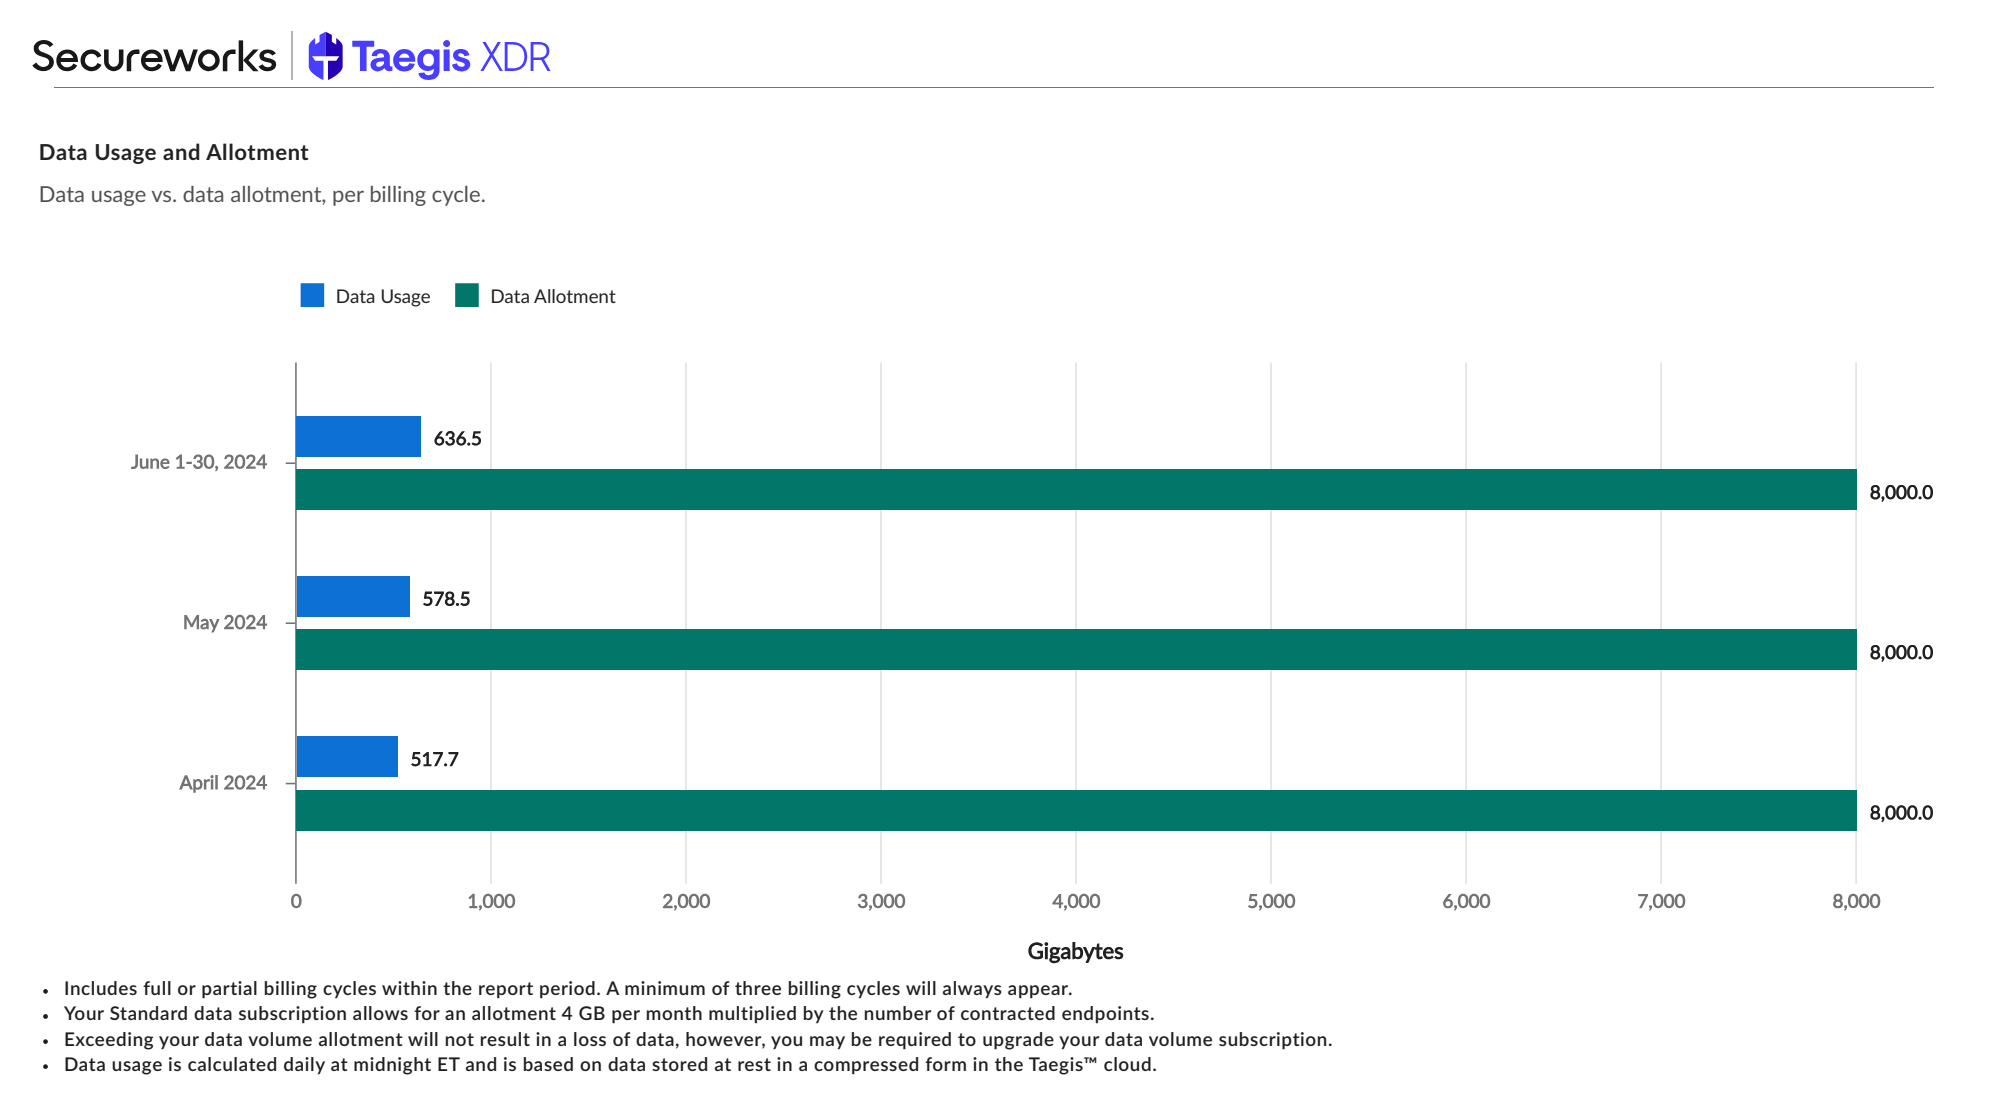 XDR Trends Report - Data